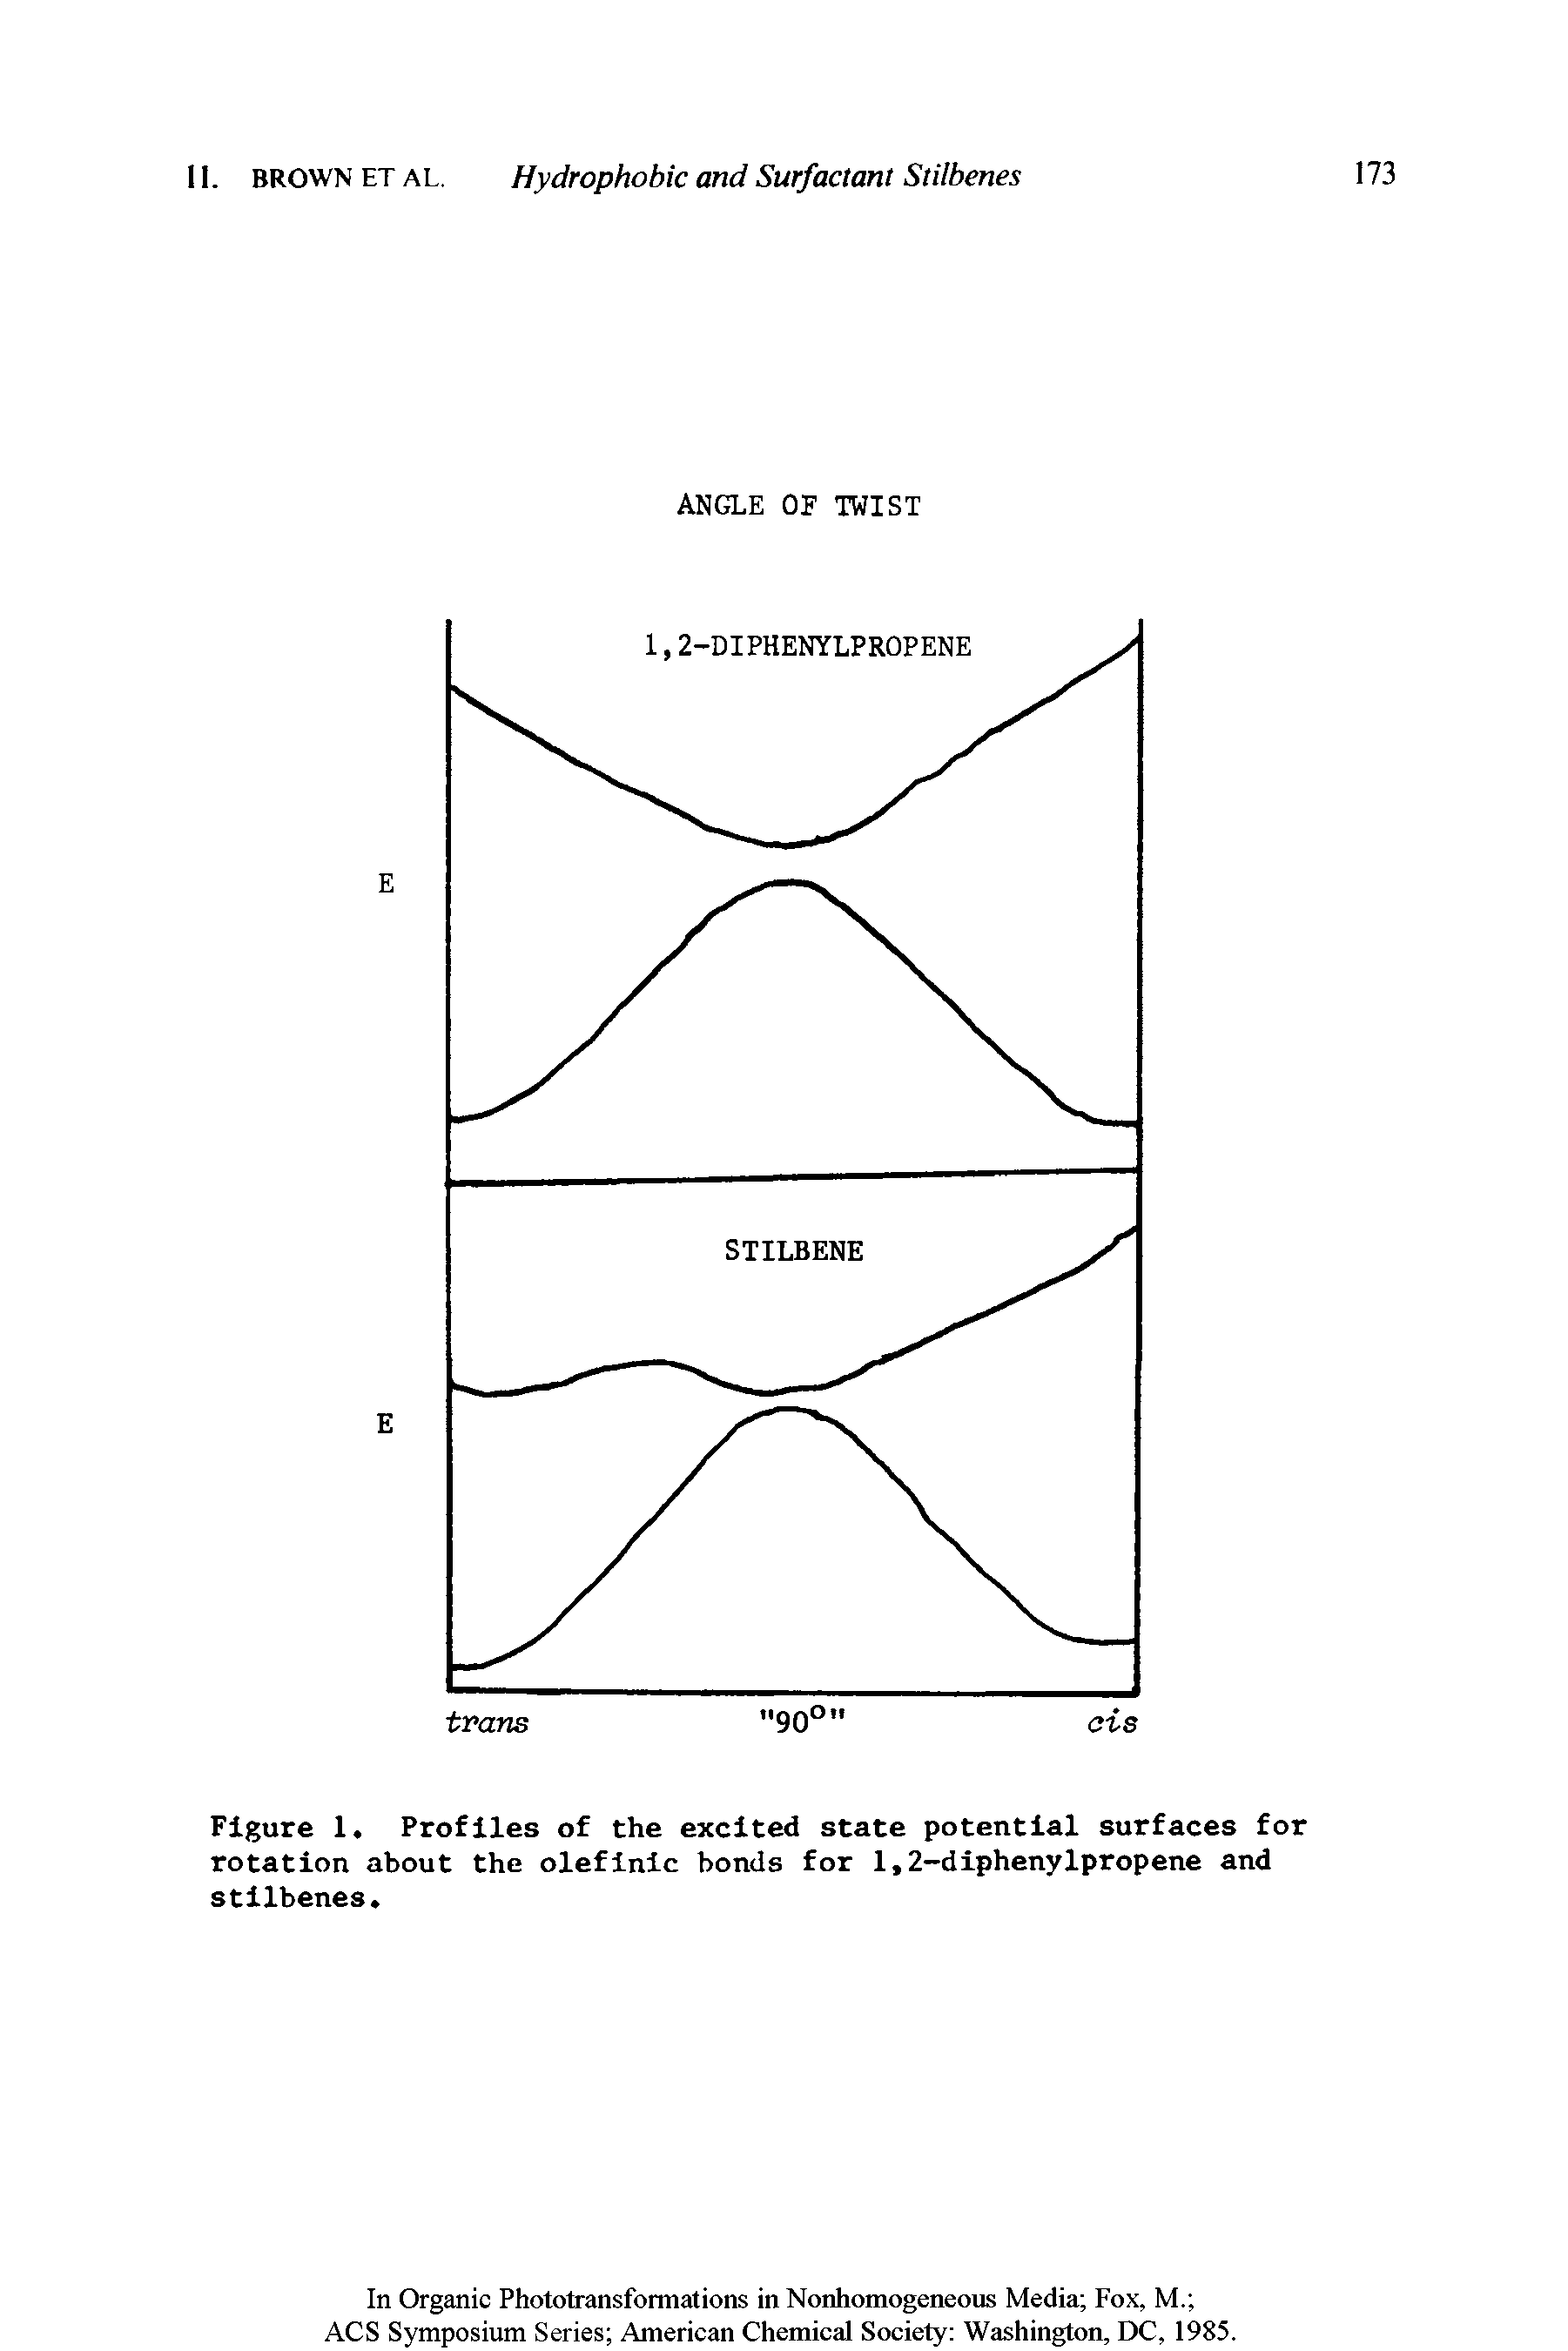 Figure 1. Profiles of the excited state potential surfaces for rotation about the olefinic bonds for 1,2-diphenylpropene and stilbenes.